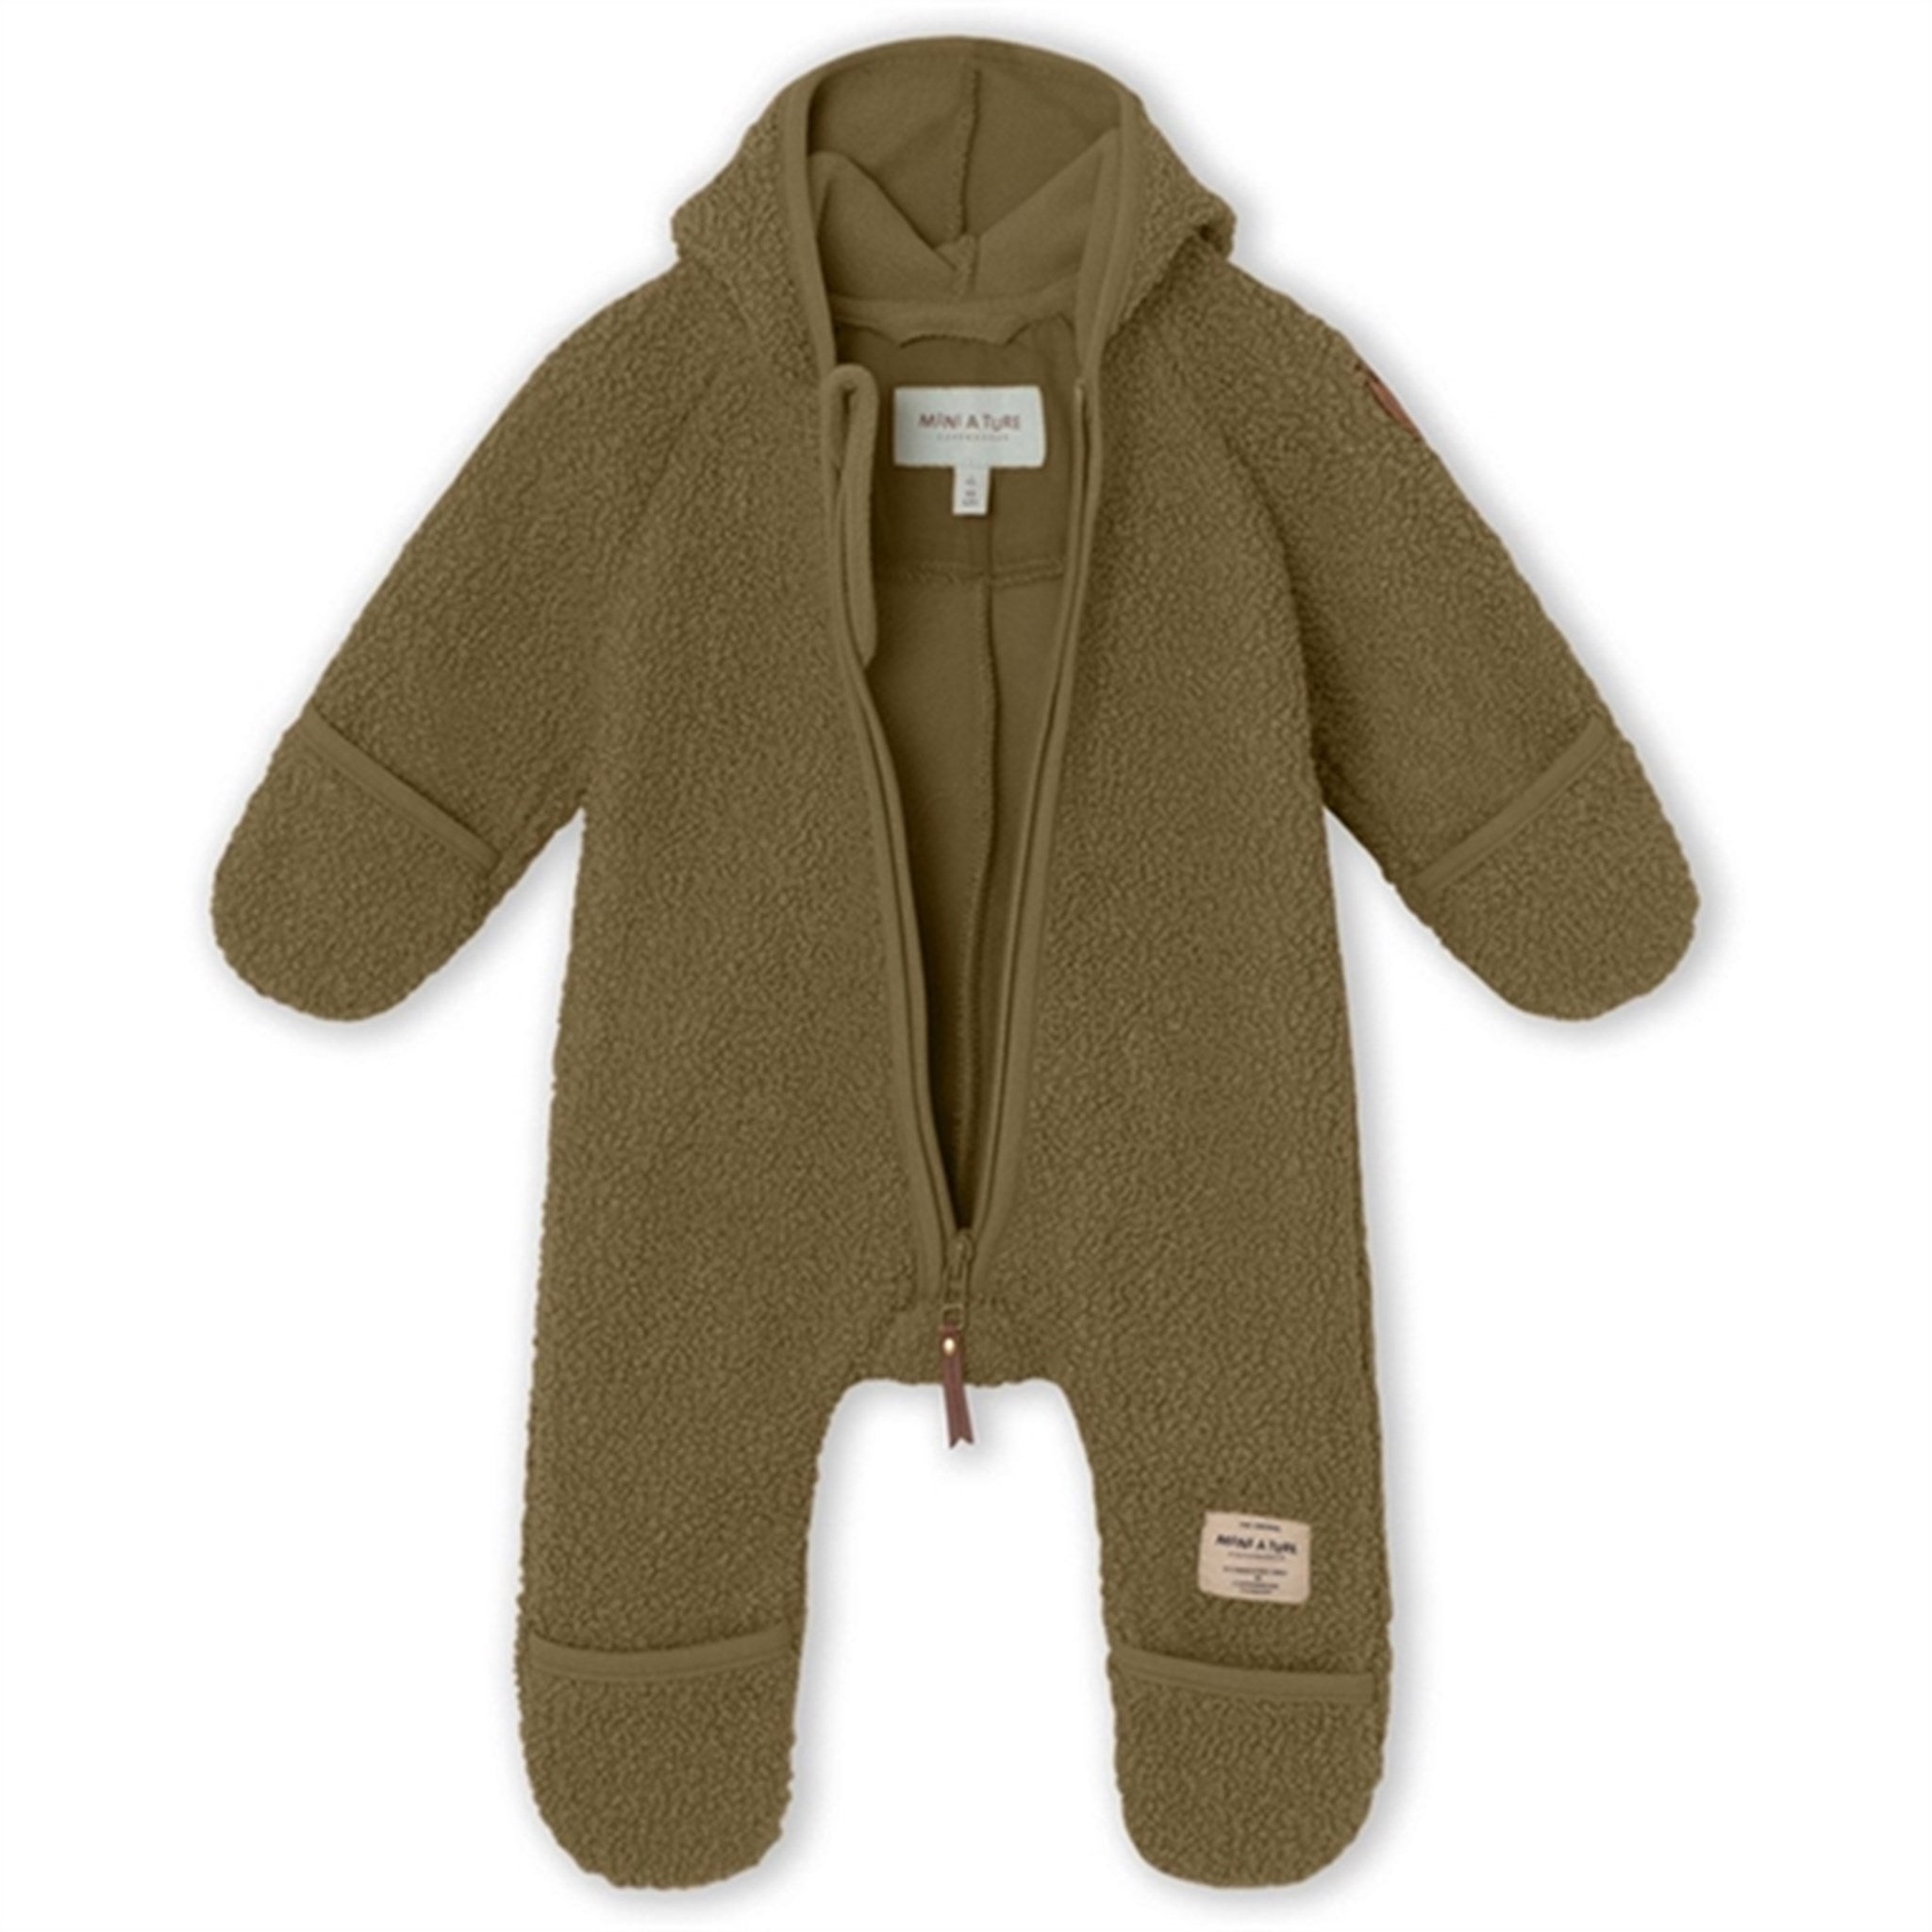 MINI A TURE Adel Teddy Fleece Overall Capers Green 2